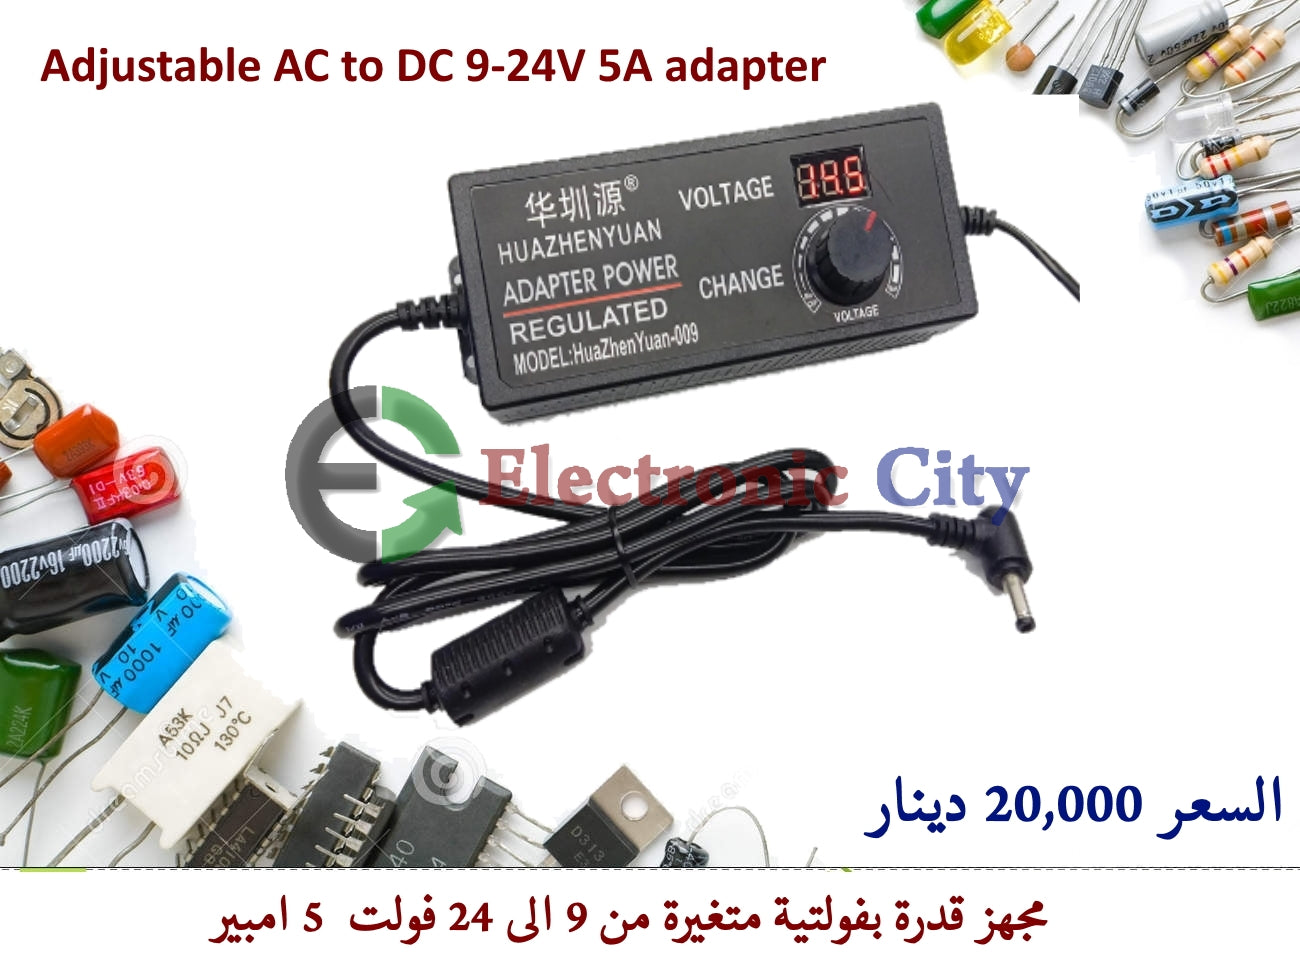 Adjustable AC to DC 9-24V 5A adapter